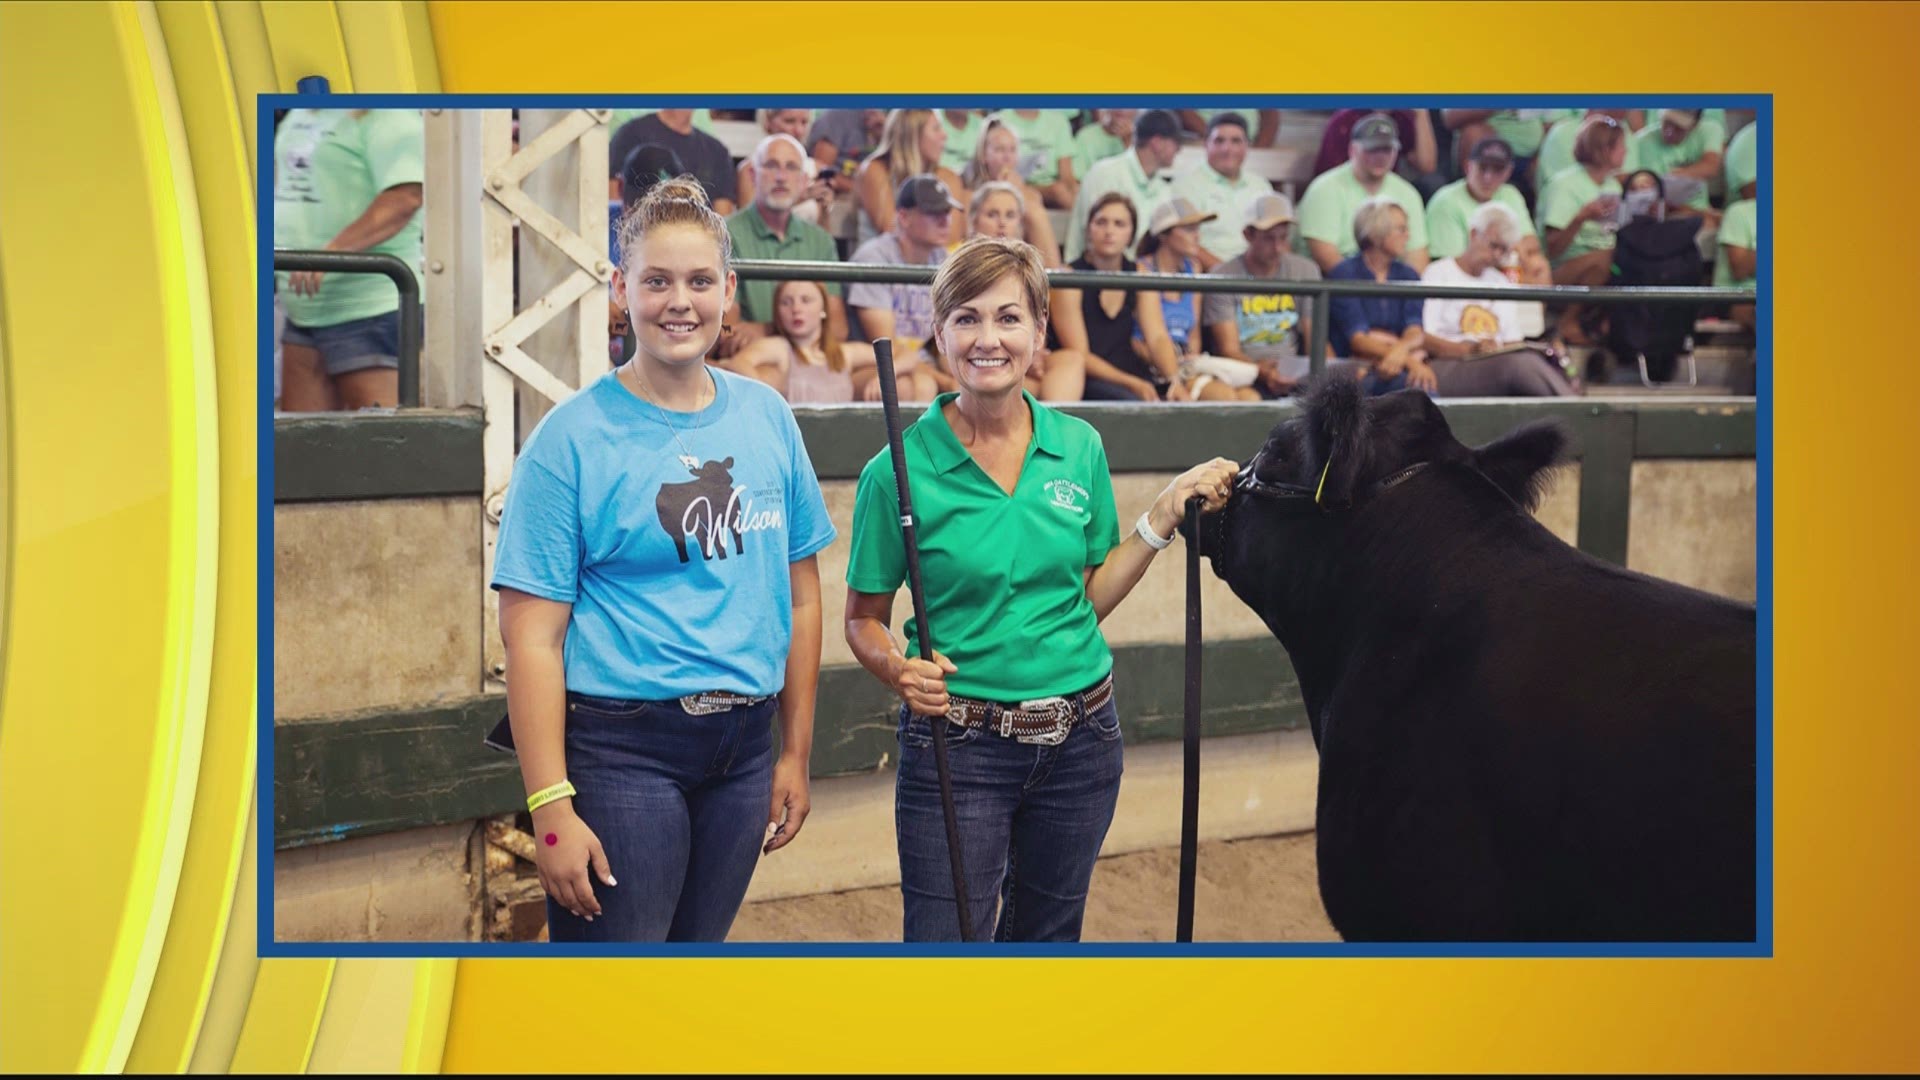 Plans are underway for the 38th Annual Governor's Charity Steer Show (GCSS) to be held on August 15, 2020.